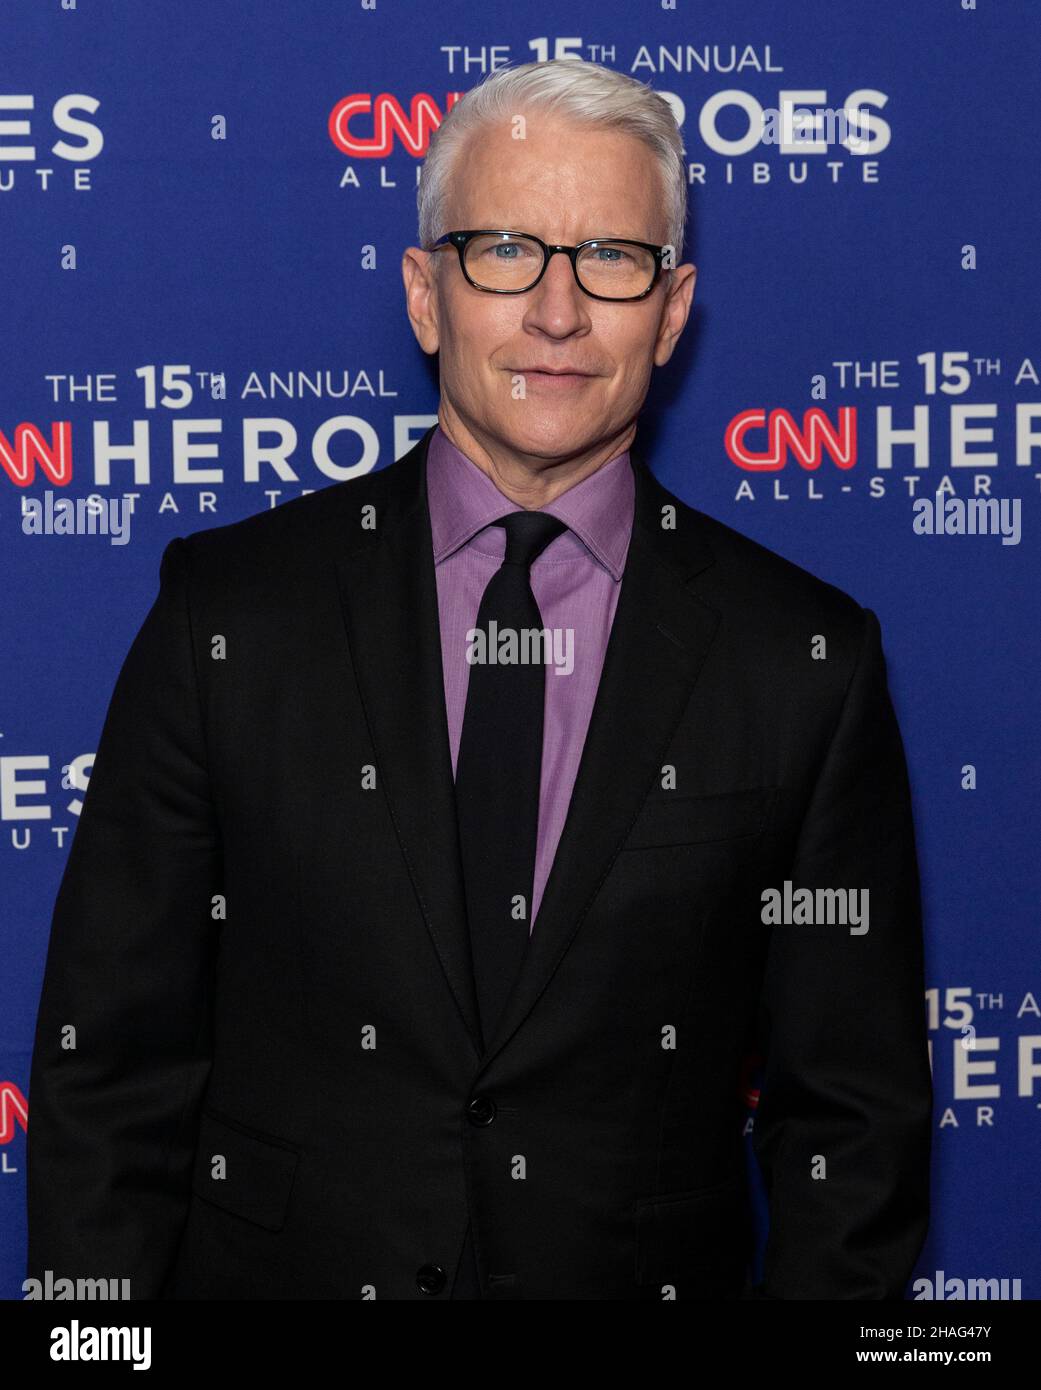 New York, NY - December 12, 2021: Anderson Cooper attends 15th Annual CNN Heroes All-Star Tribute at American Museum of Natural History Stock Photo